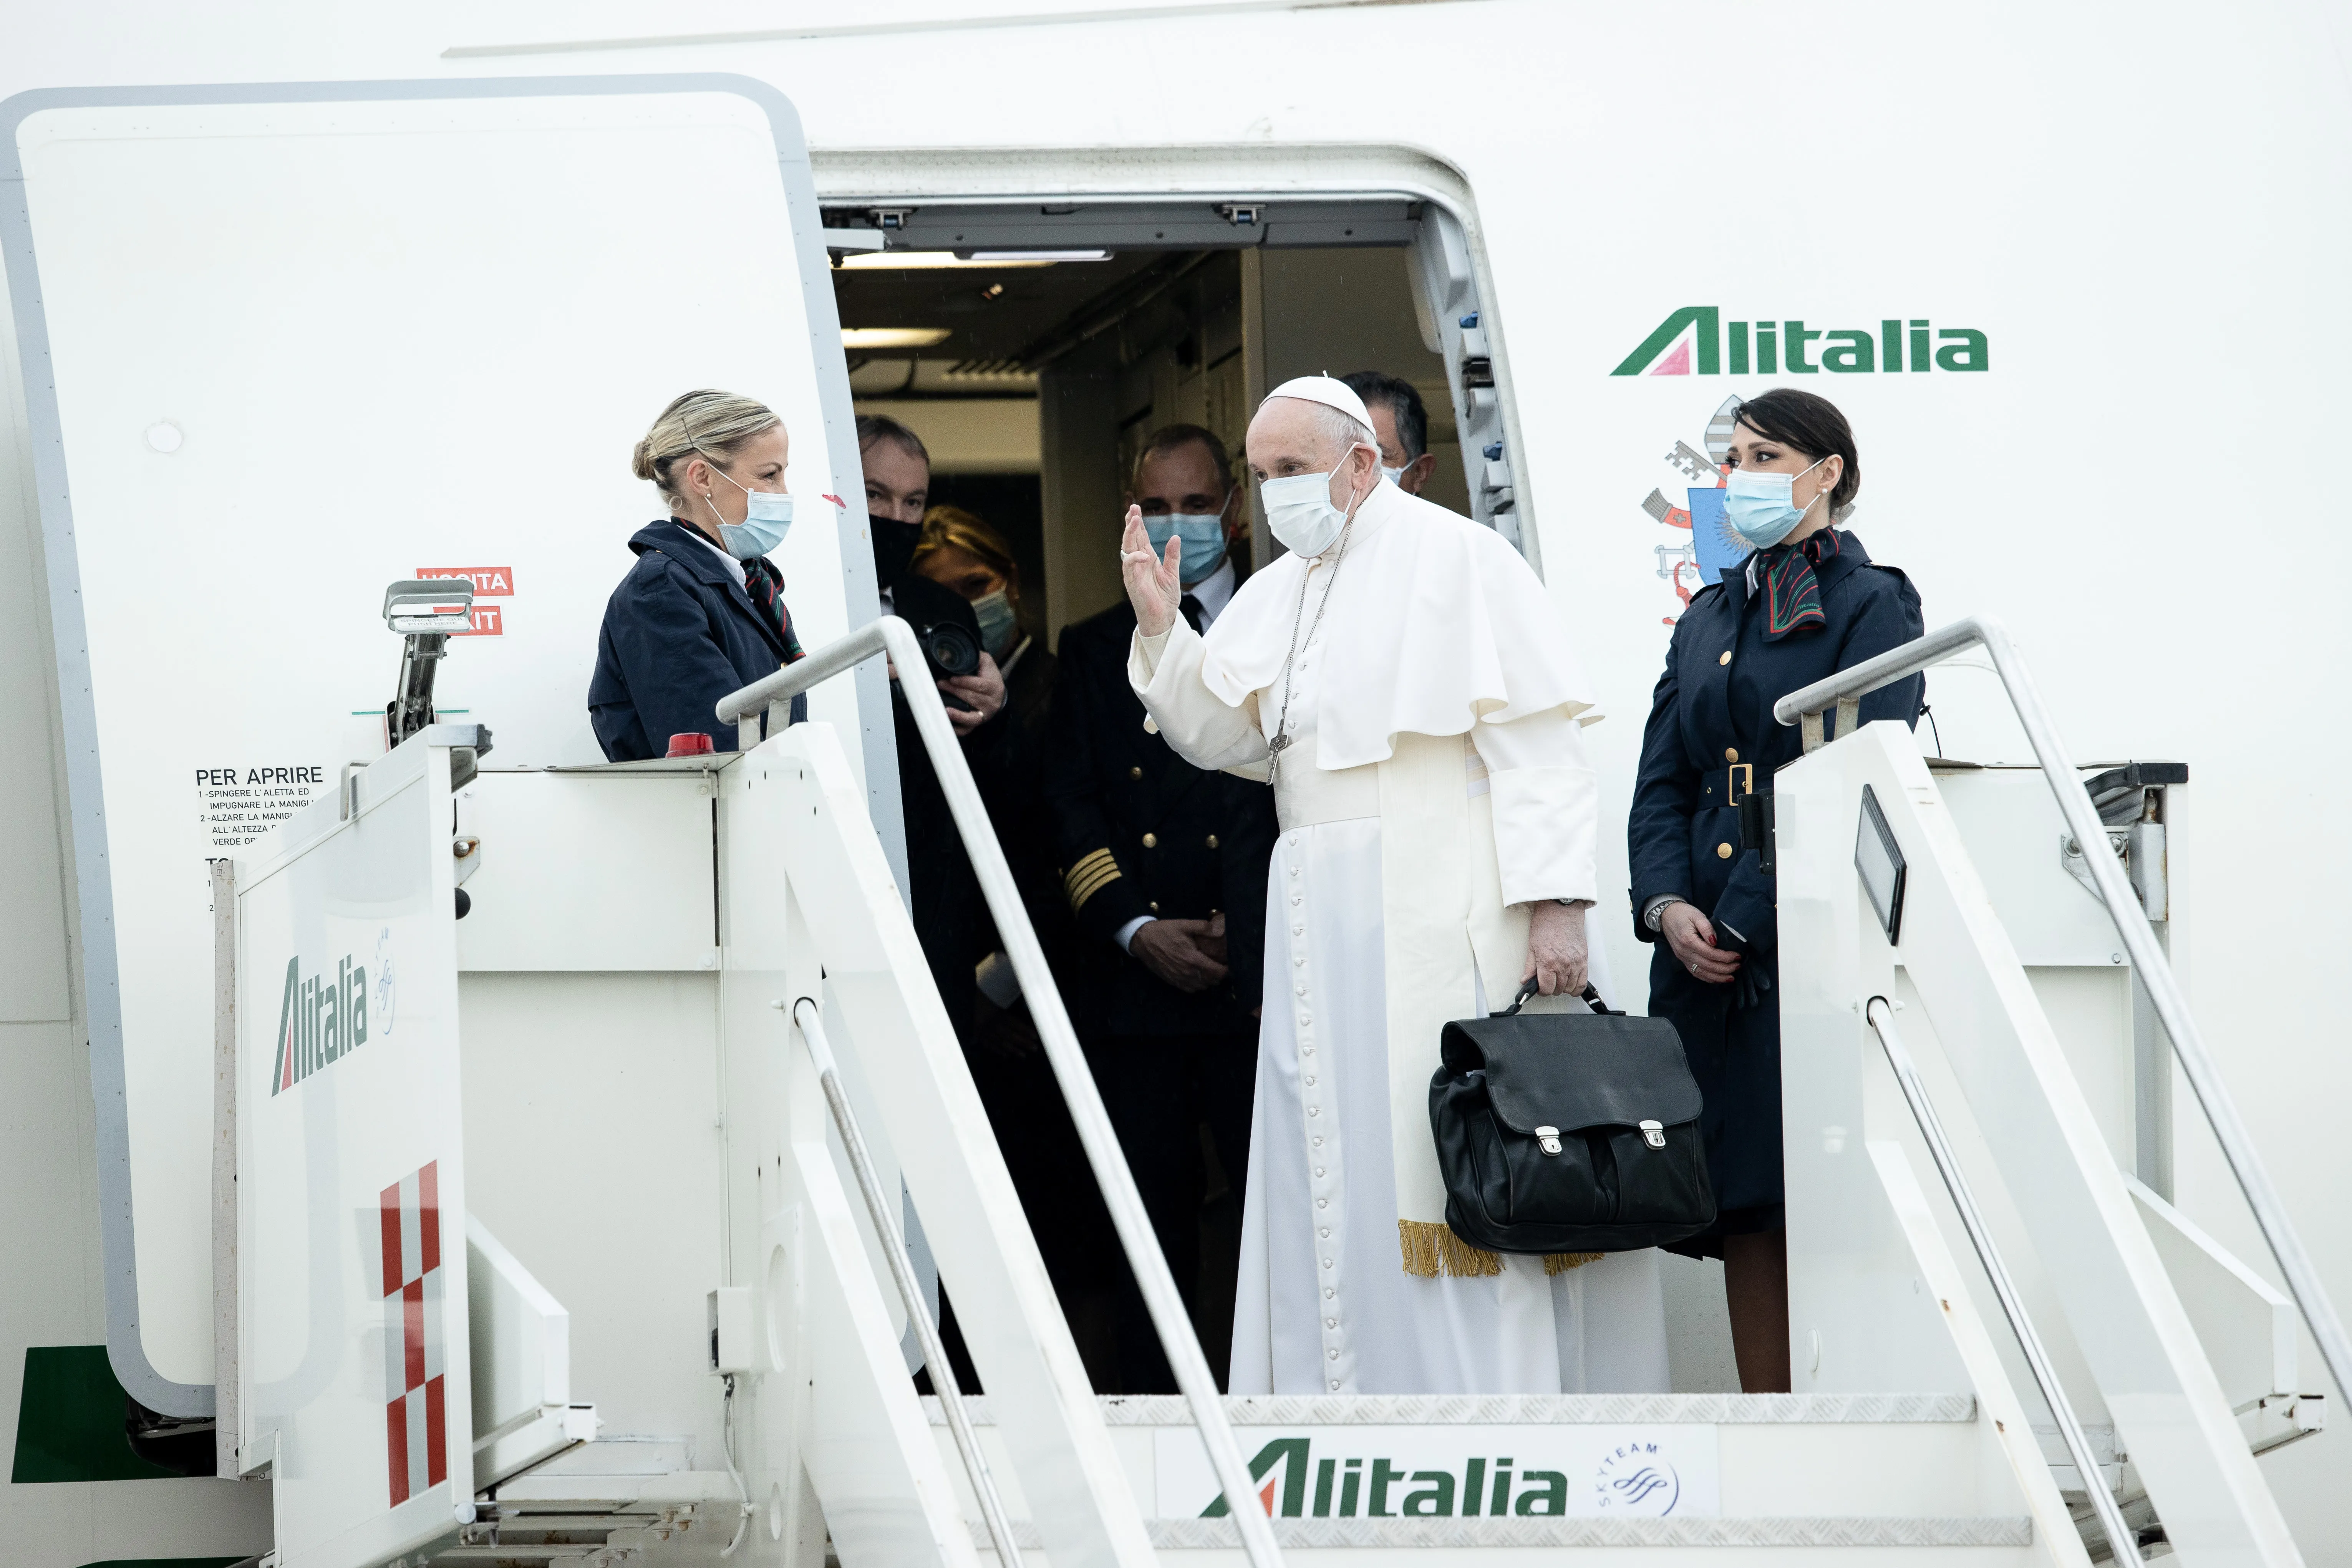 Pope Francis boards the papal plane before a visit to Iraq March 5, 2021.?w=200&h=150